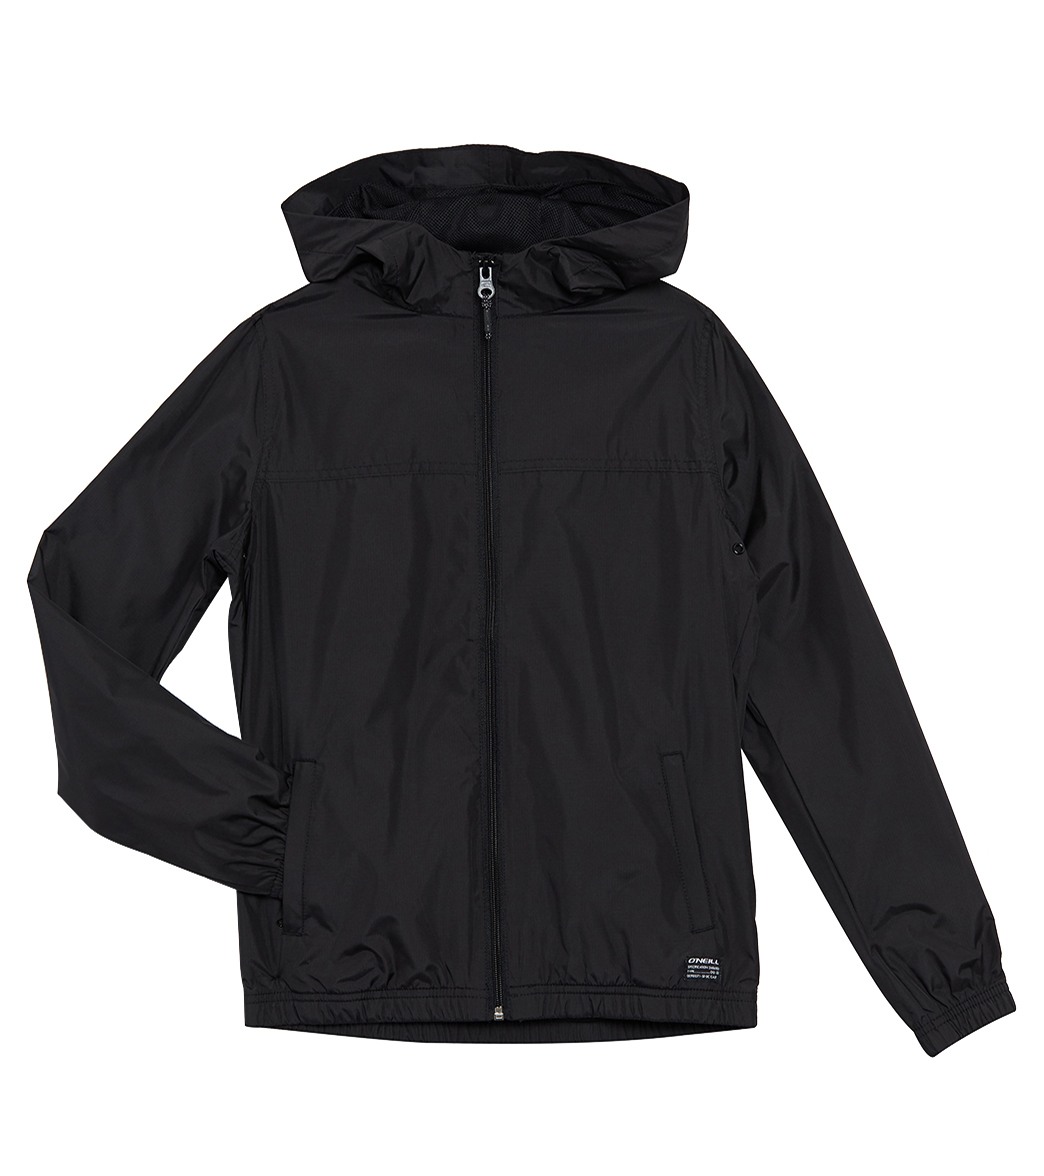 O'neill Boys' Del Ray Packable Windbreaker Jacket Big Kid - Black Large 14/16 Cotton/Polyester - Swimoutlet.com